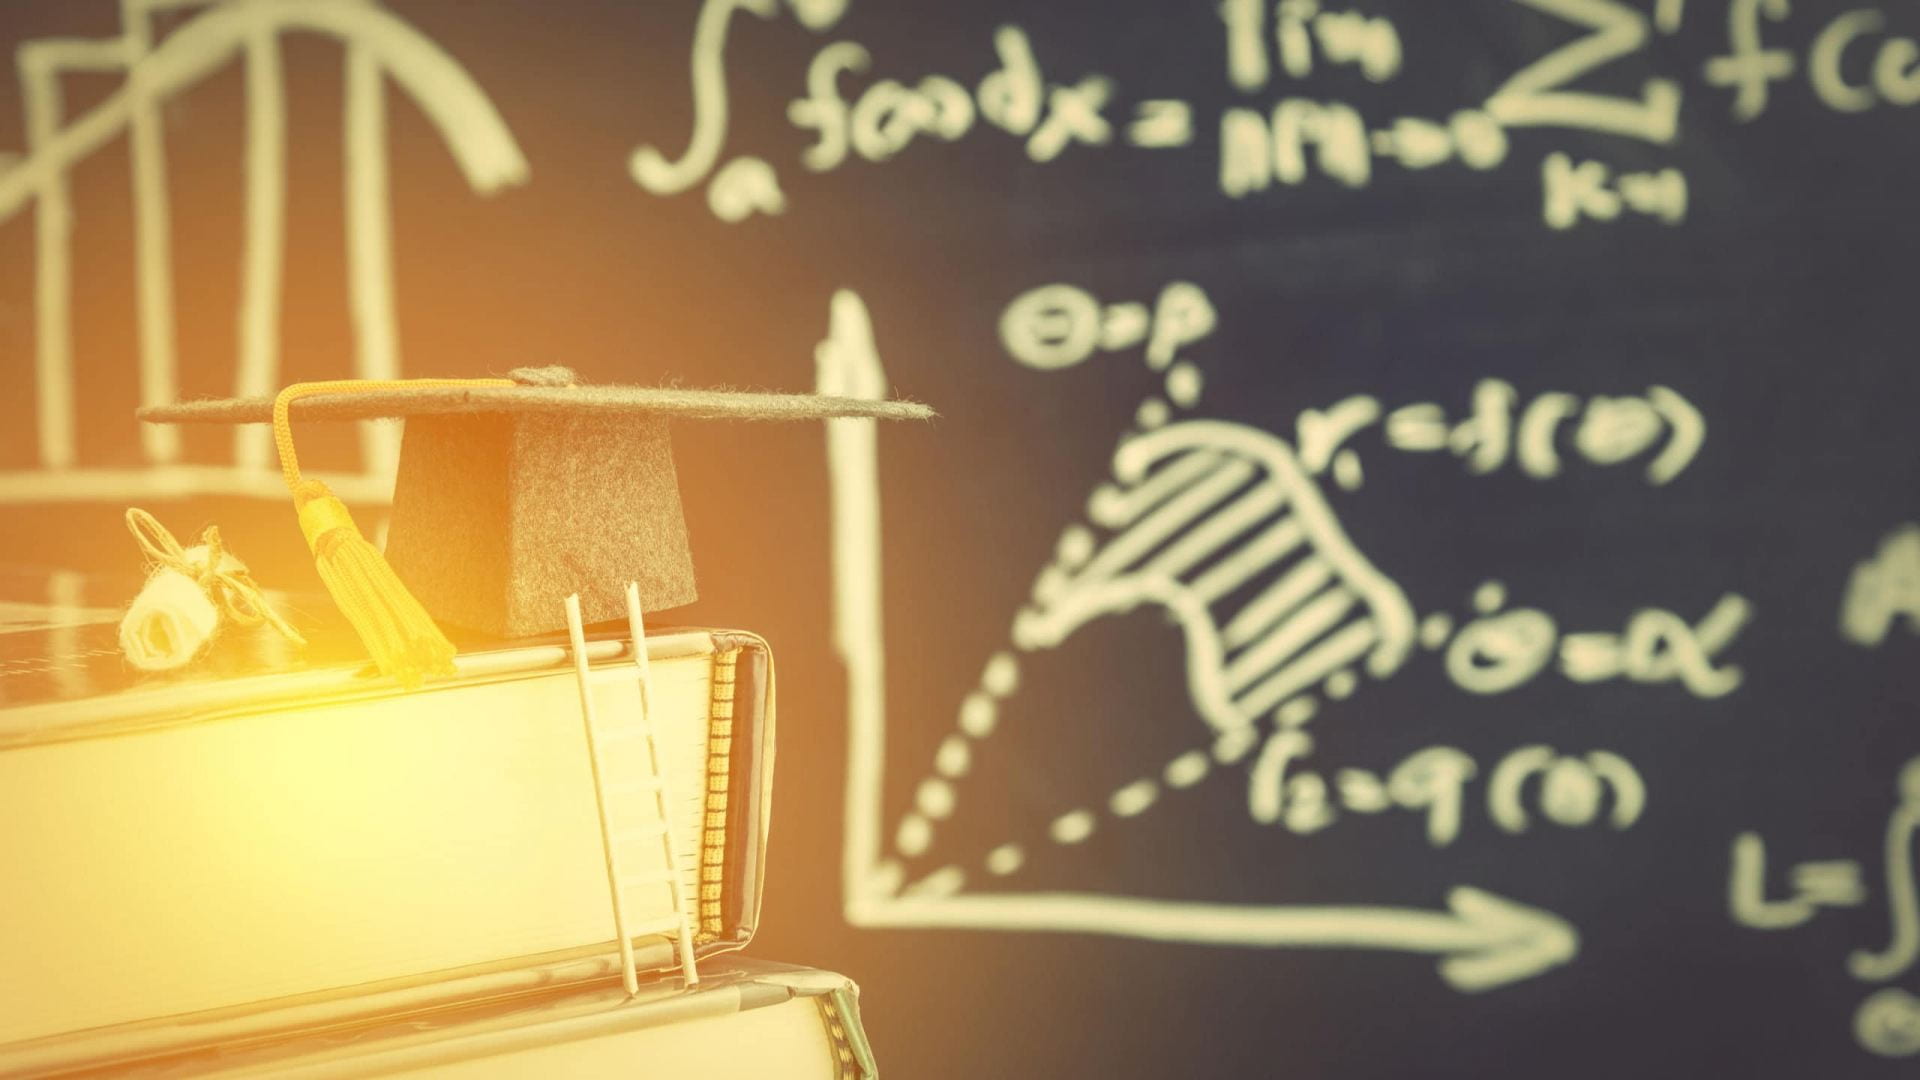 Stock image showing a mortar board, books and a blackboard